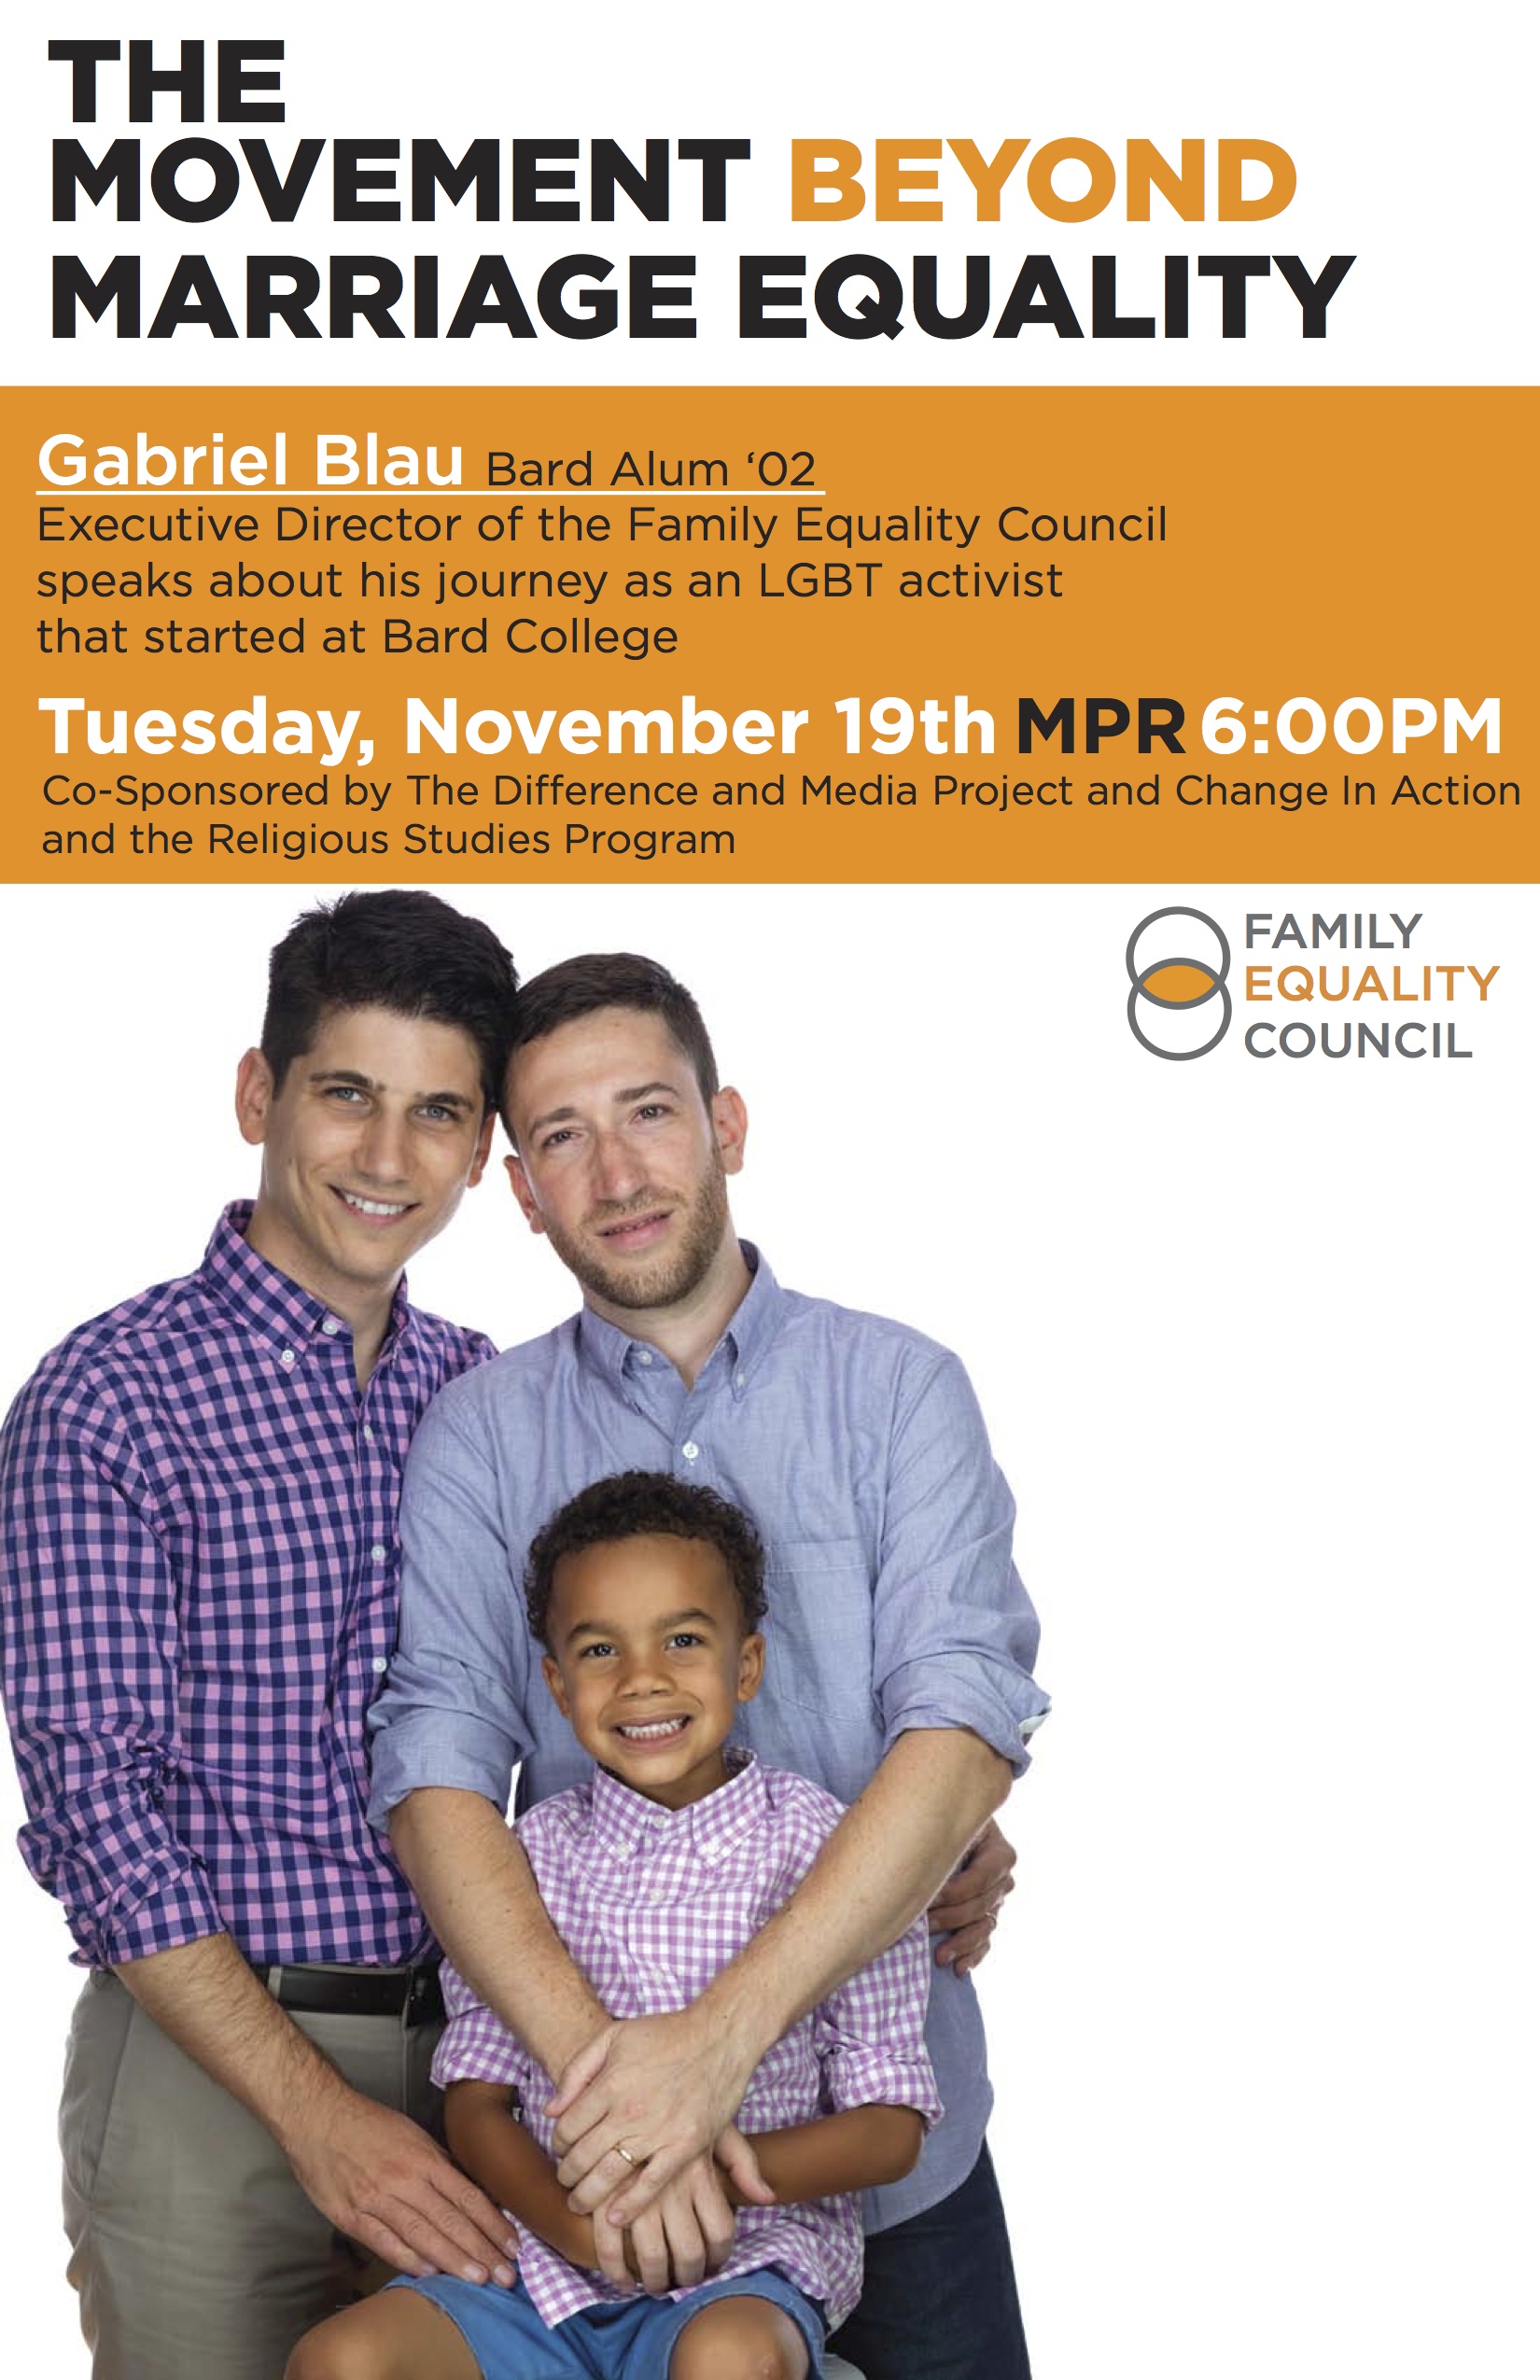 "The Movement Beyond Marriage Equality" Gabriel Blau: Executive Director of the Family Equality Council